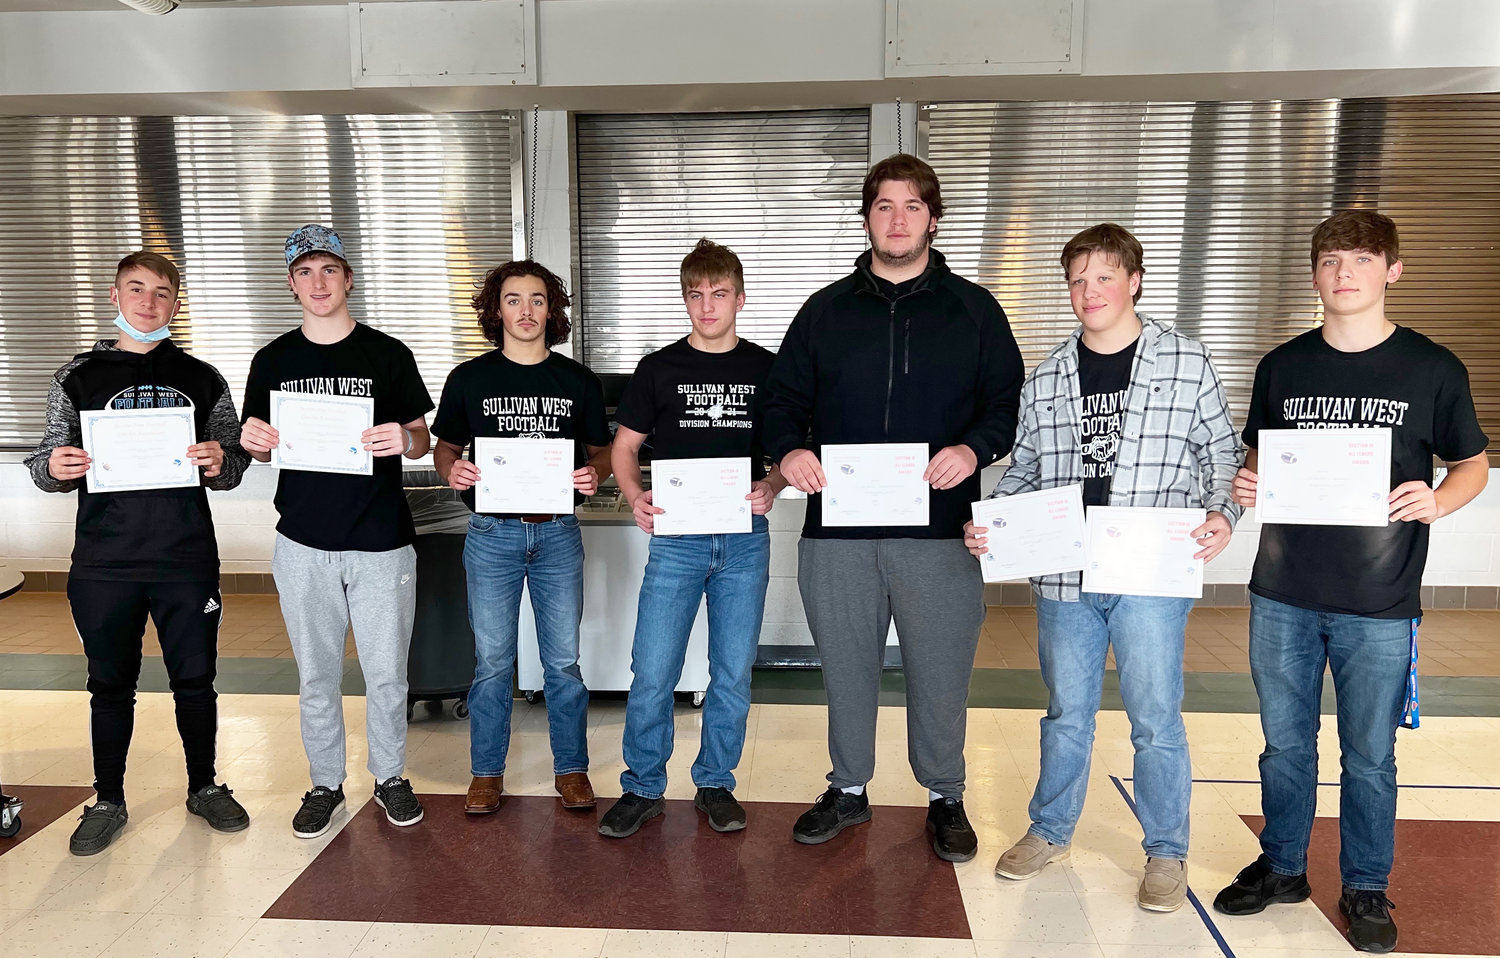 Section IX First Team League All-Stars included Rally Cruz (third from left), Jakob Halloran, Chris Campanelli, Gavin Hauschild and Justin Grund. Honorable Mention was awarded to Jacob Hubert (far left) and Jaymes Buddenhagen.